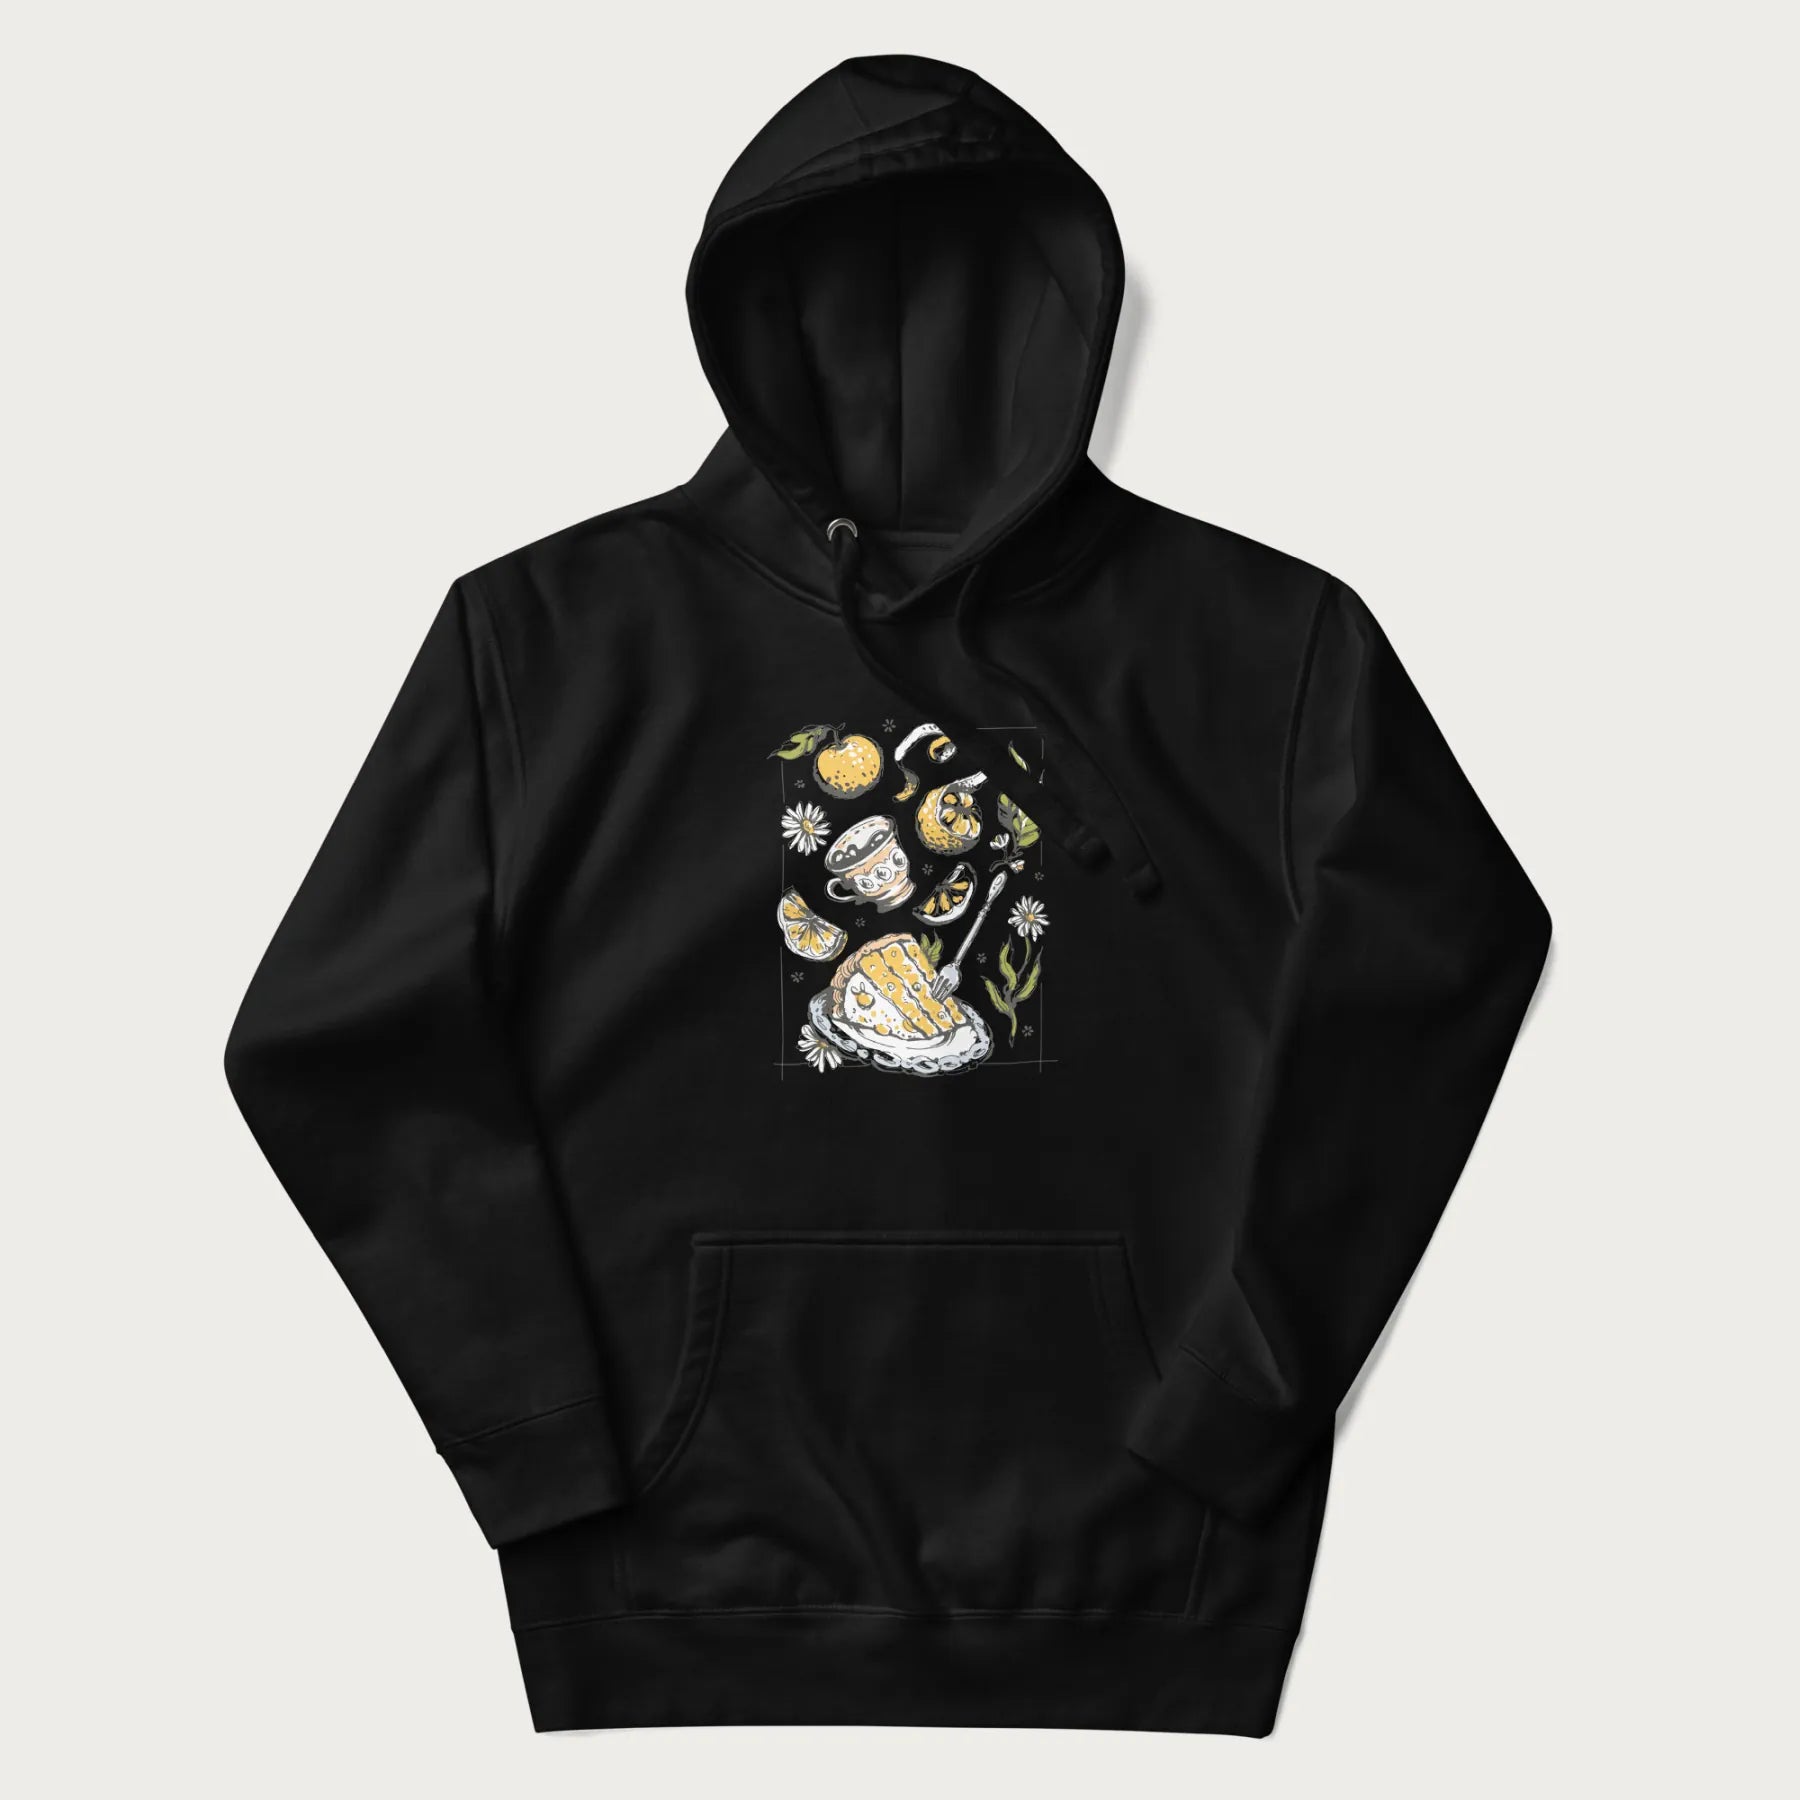 Black hoodie featuring a Cottagecore-themed graphic with oranges, a floral porcelain cup, orange pie, and daisies.